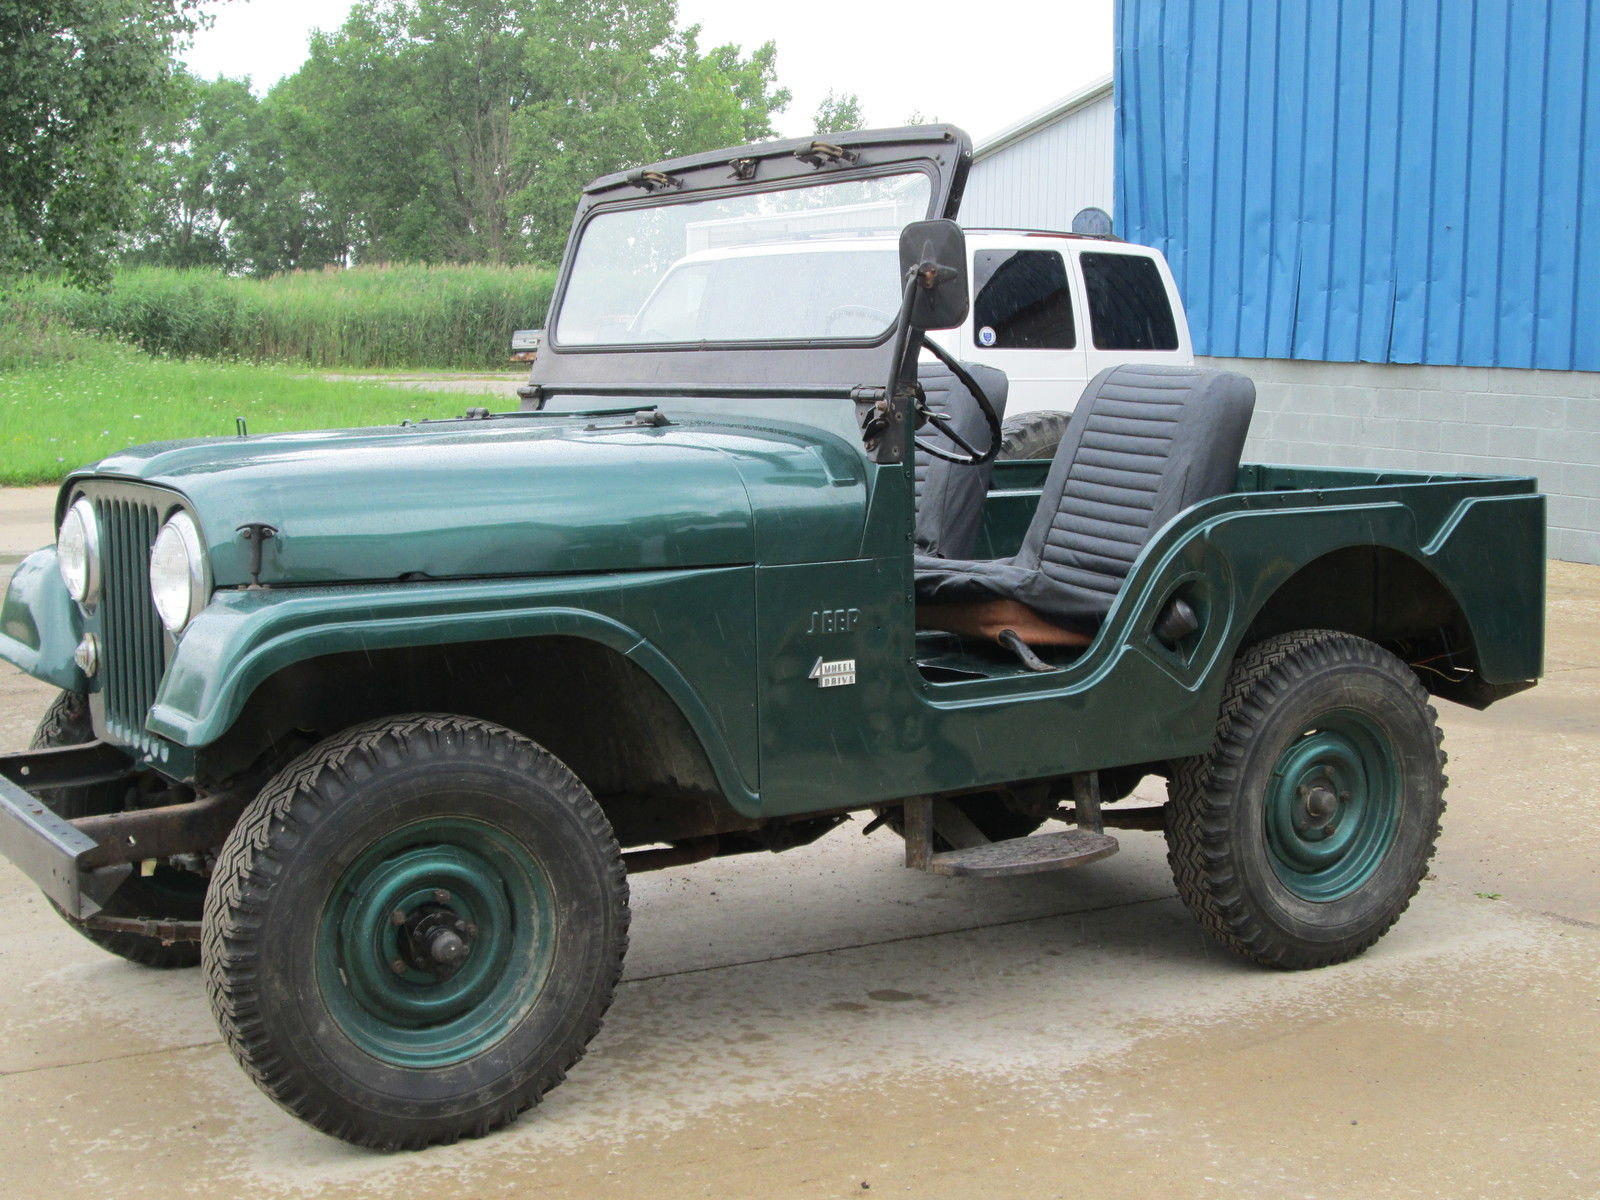 1956 Willys Jeep CJ5 Civilian Stored Indoors Classic